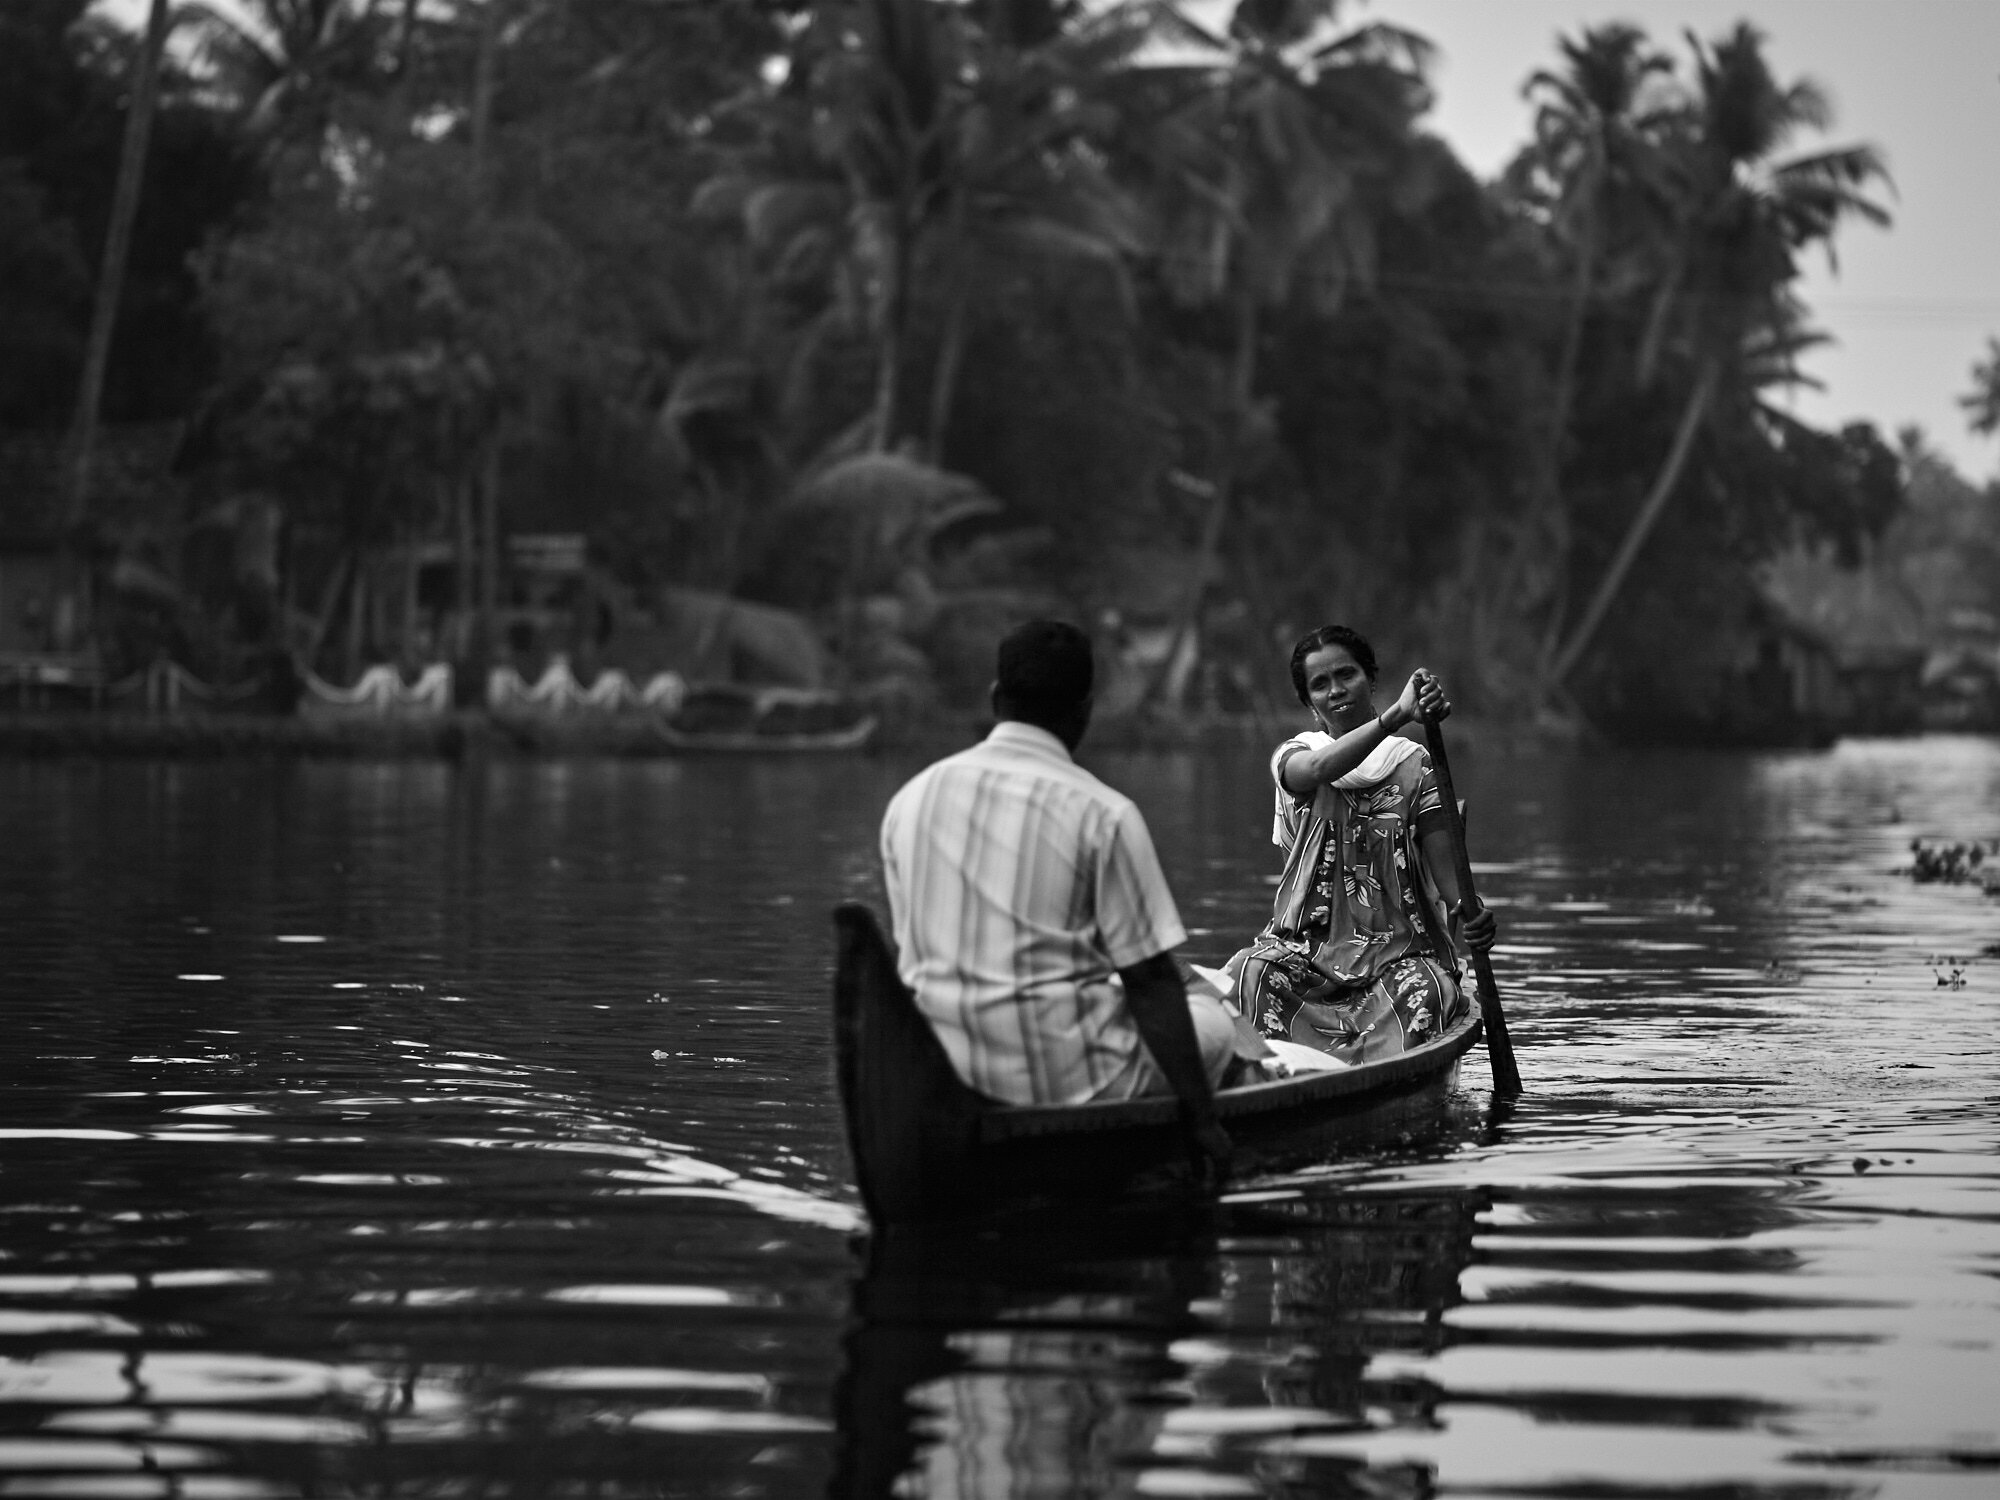  A family was navigating the backwaters in a small wooden boat in Alappuzha, Kerala. 